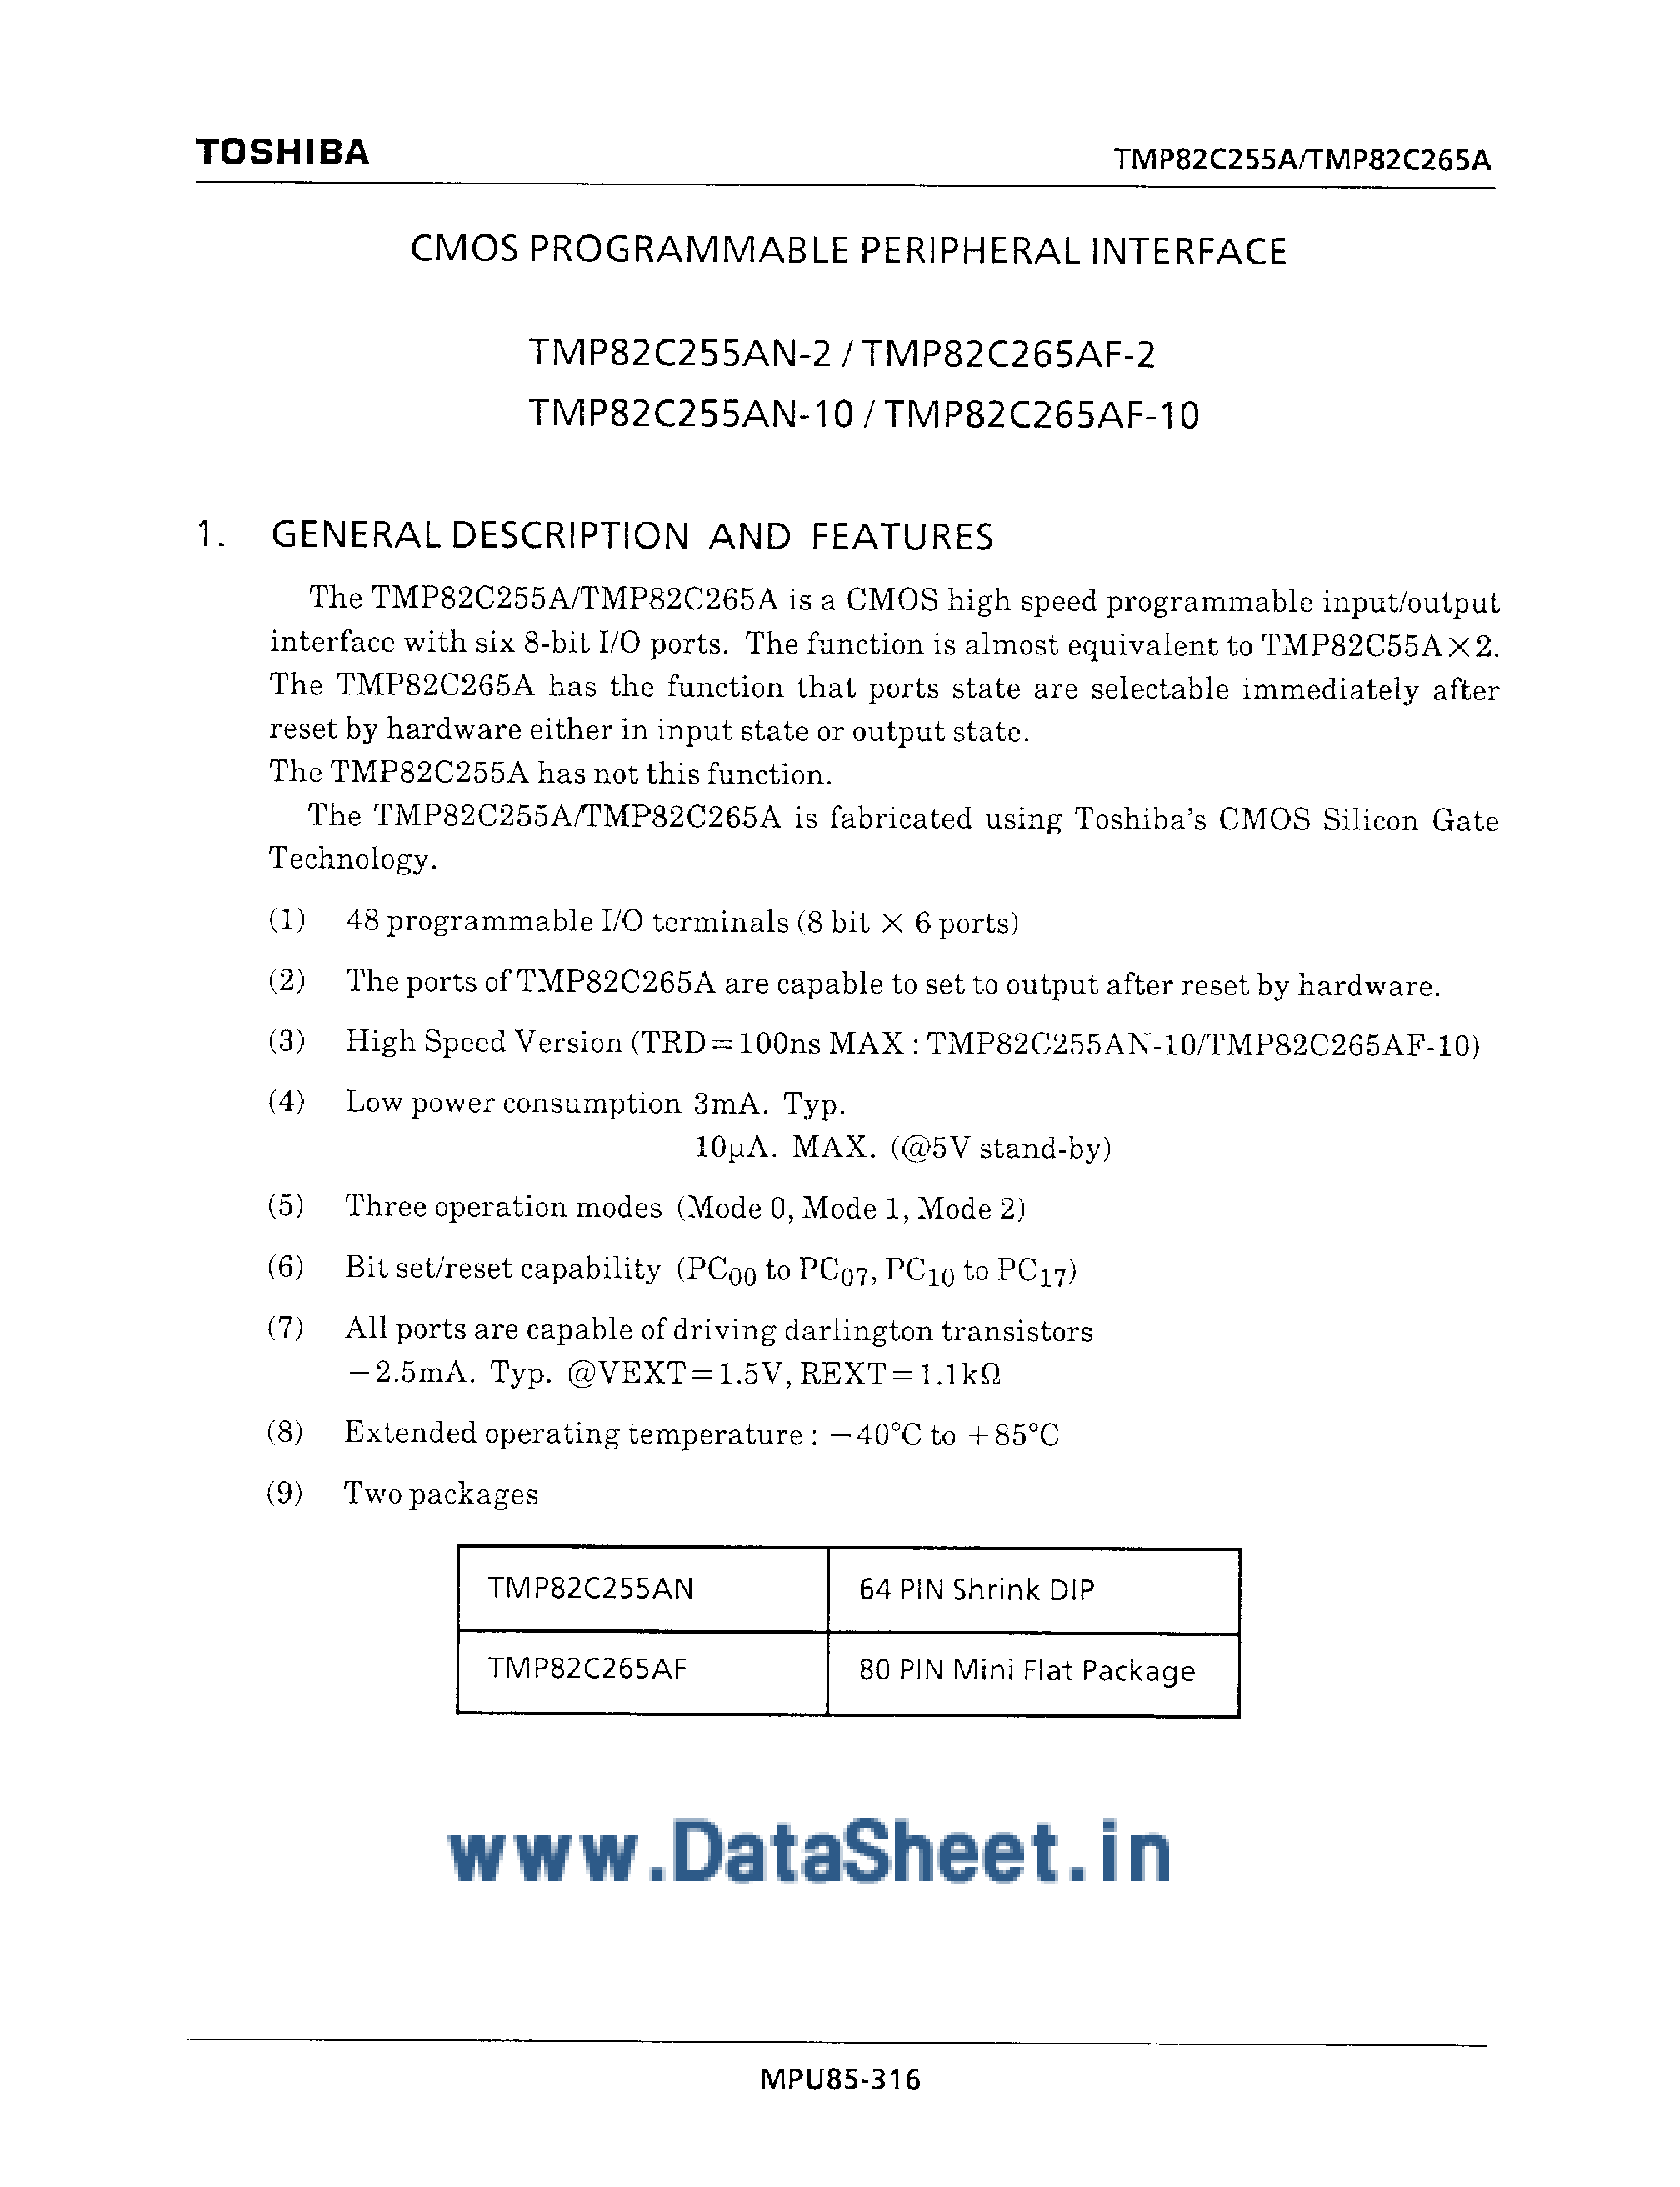 Datasheet TMP82C255A - (TMP82C255A / TMP82C265A) CMOS Programmable Peripheral Interface page 1